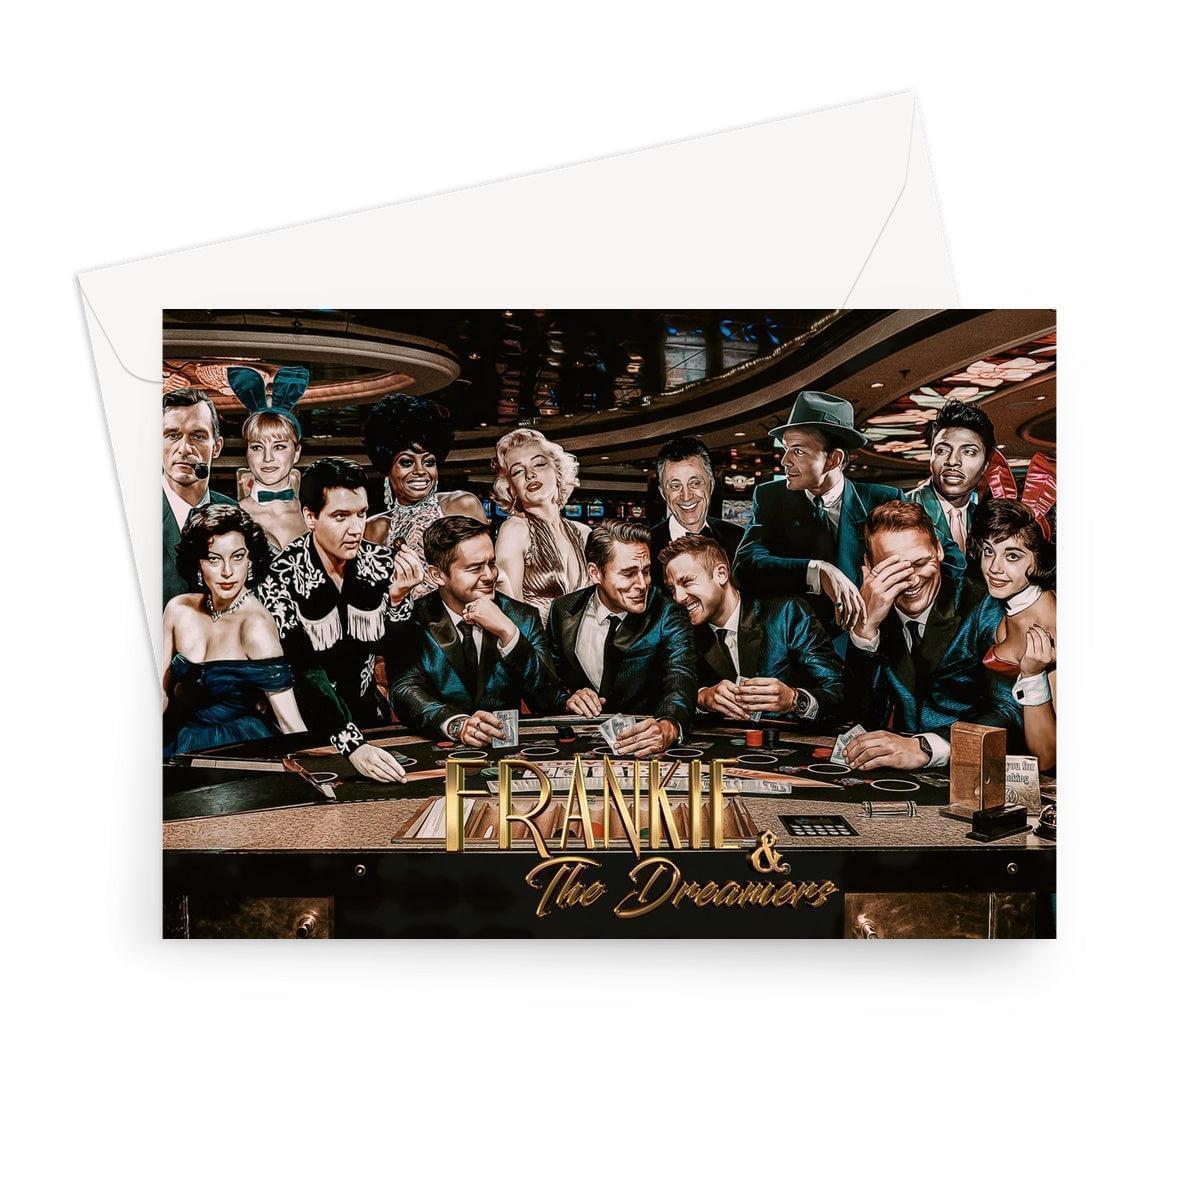 Frankie And The Dreamers Casino 2 Greeting Card | Stationery 7"x5" 1 Card